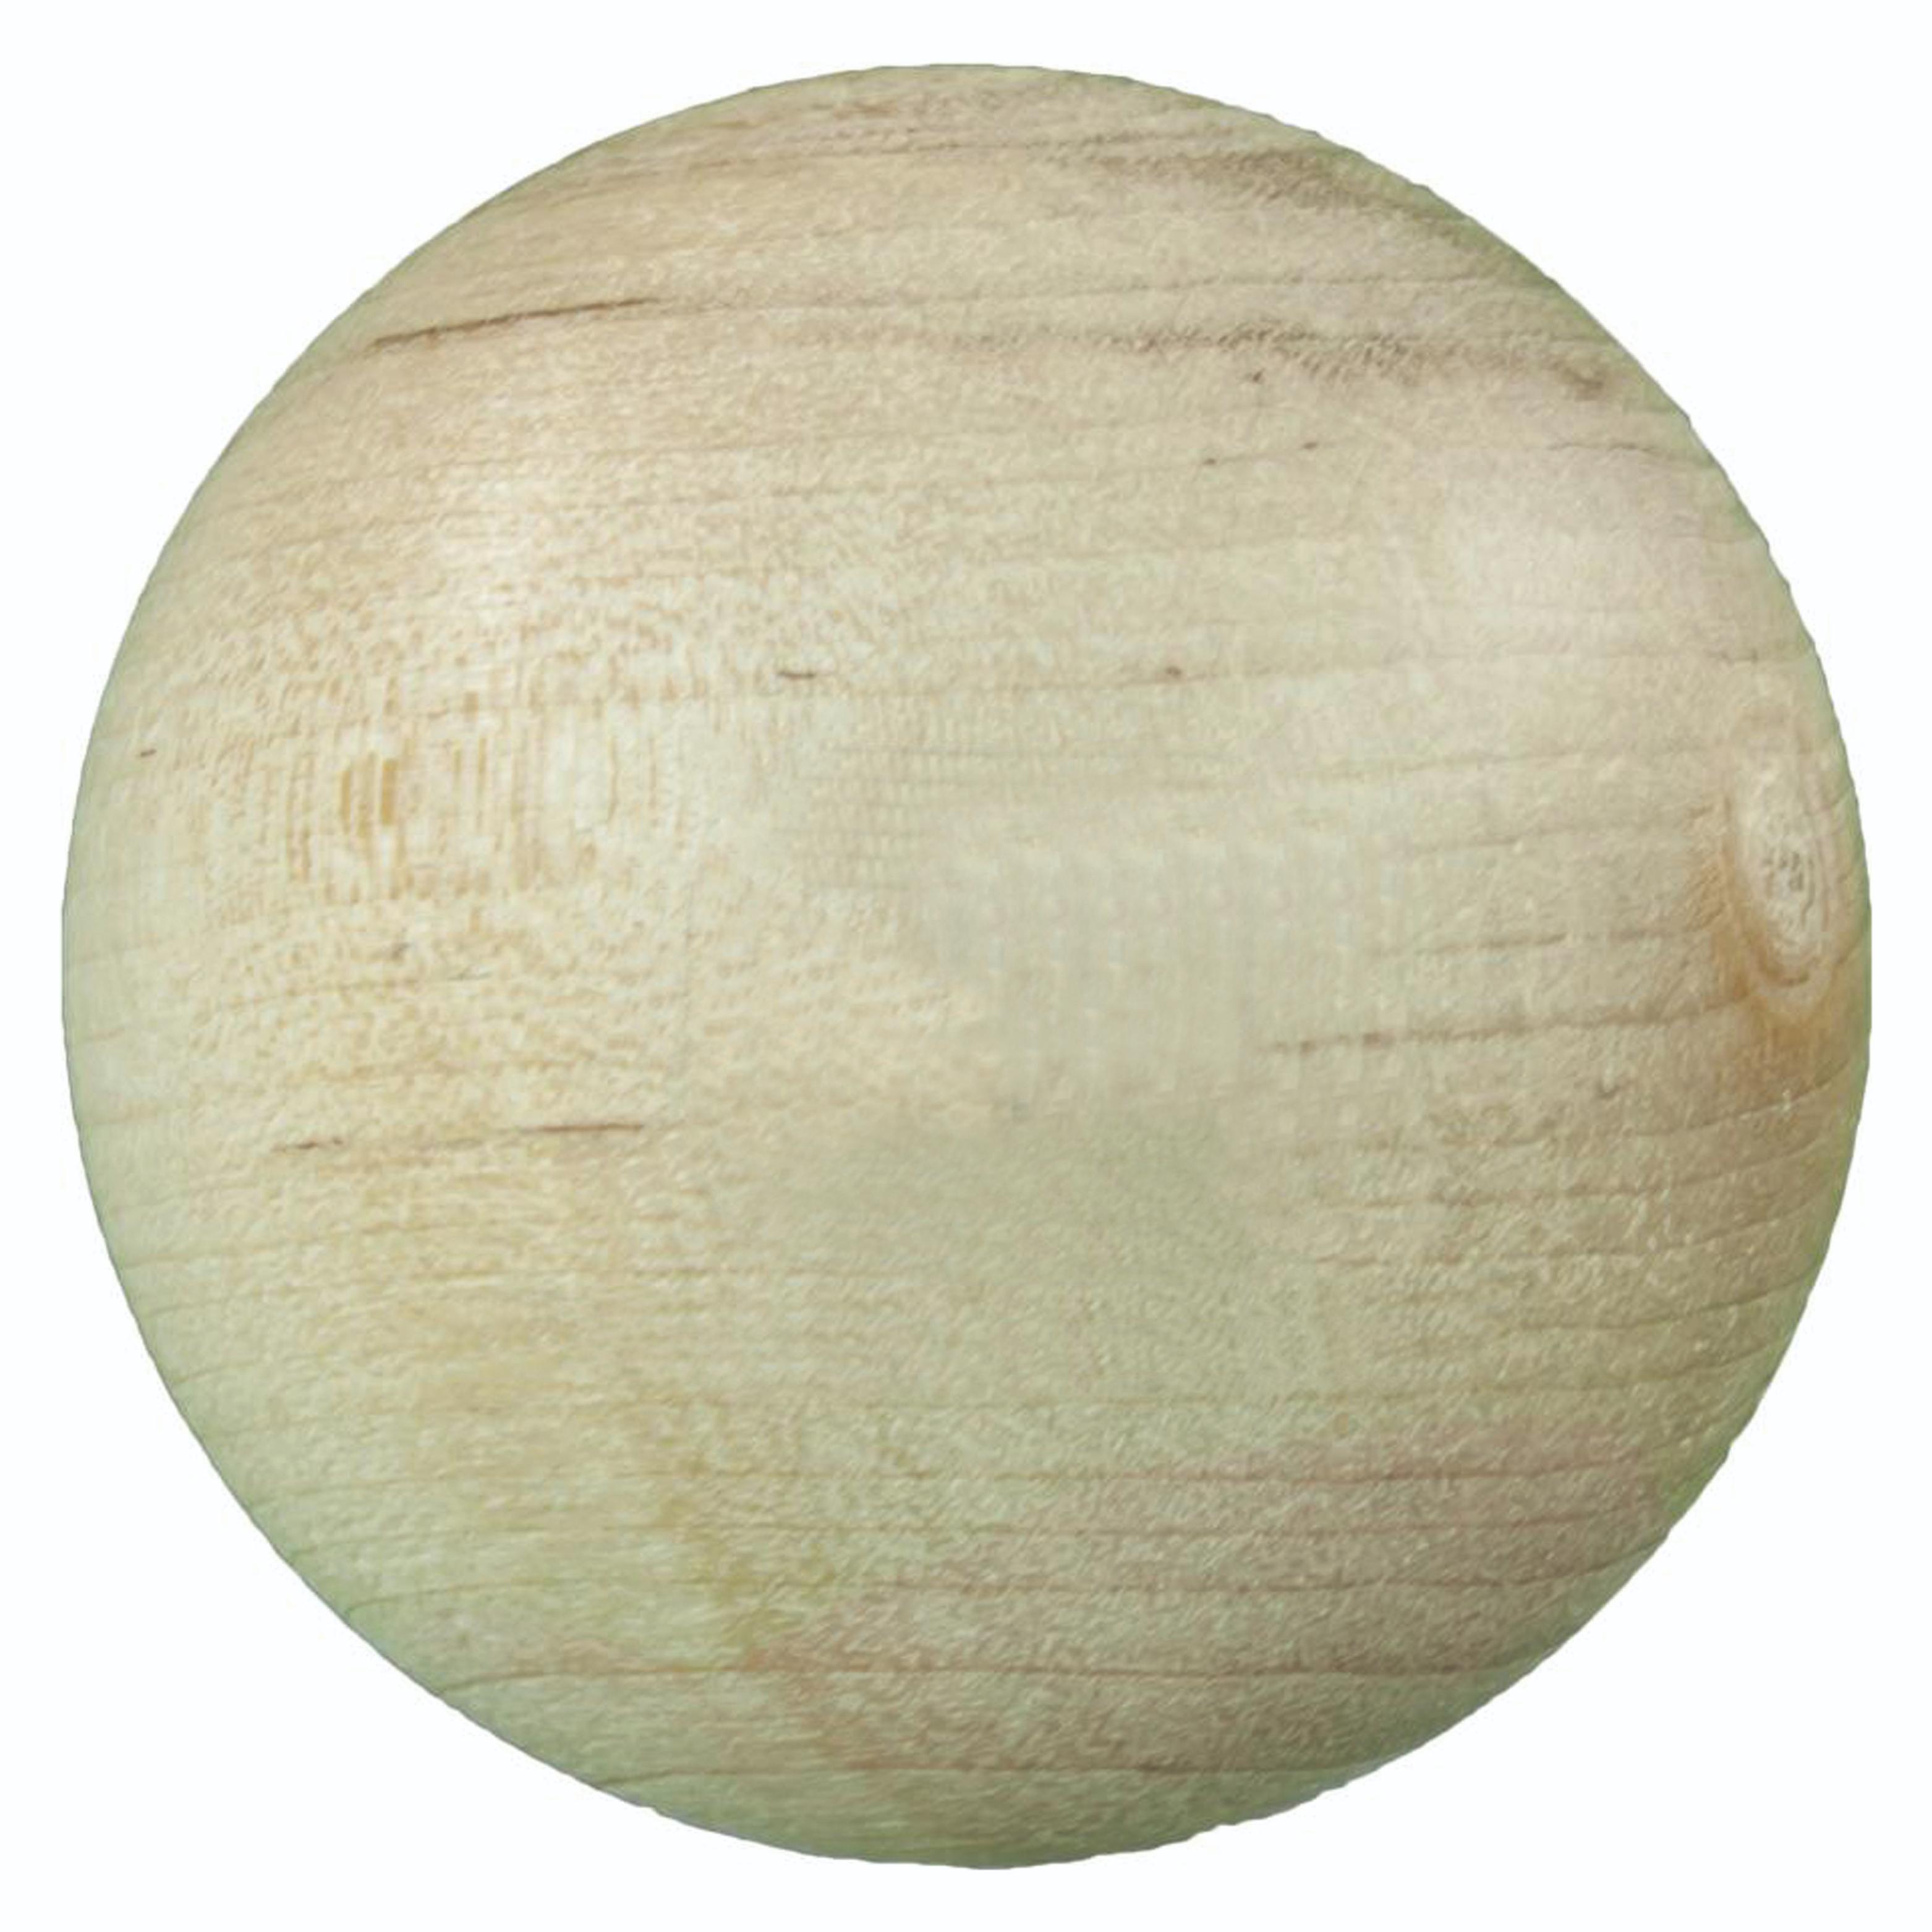 A&R Wood Stick Handling Ballproduct zoom image #2